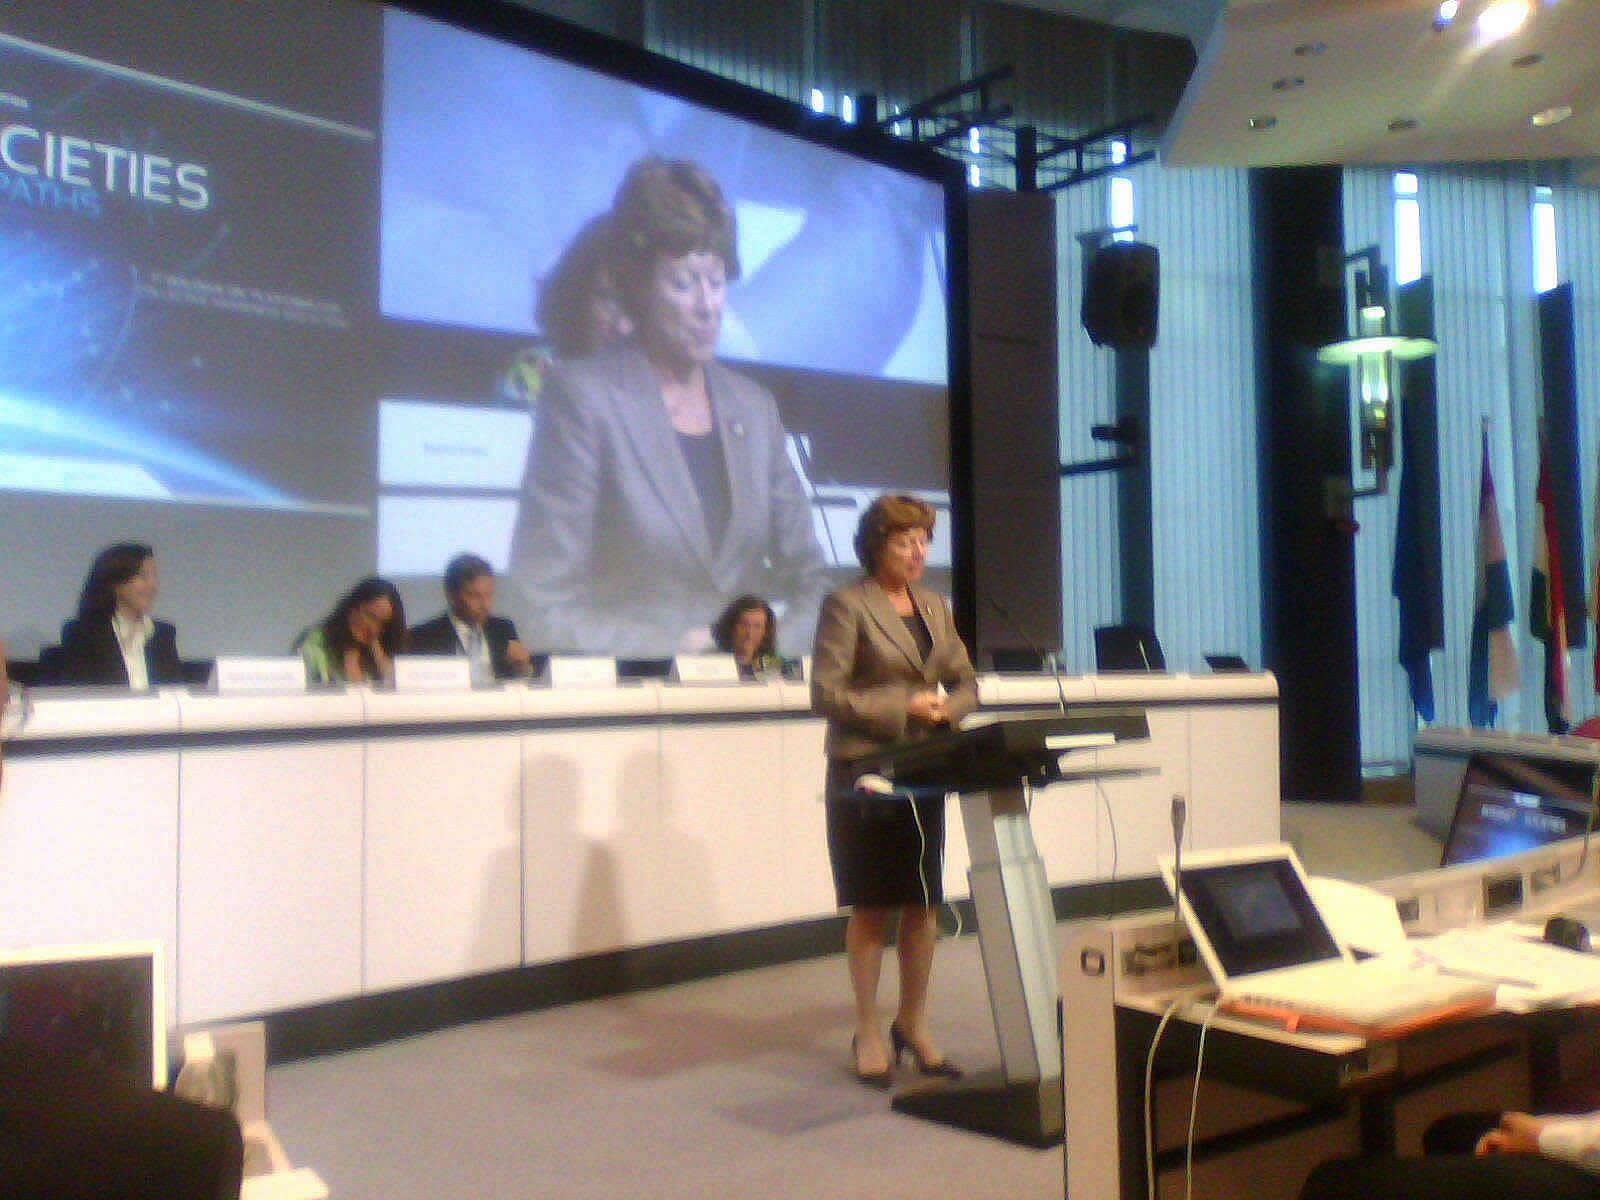 Read the speech from Neelie Kroes 08-09-2011 at Paradiso on the internet and society, and the role of public authorities